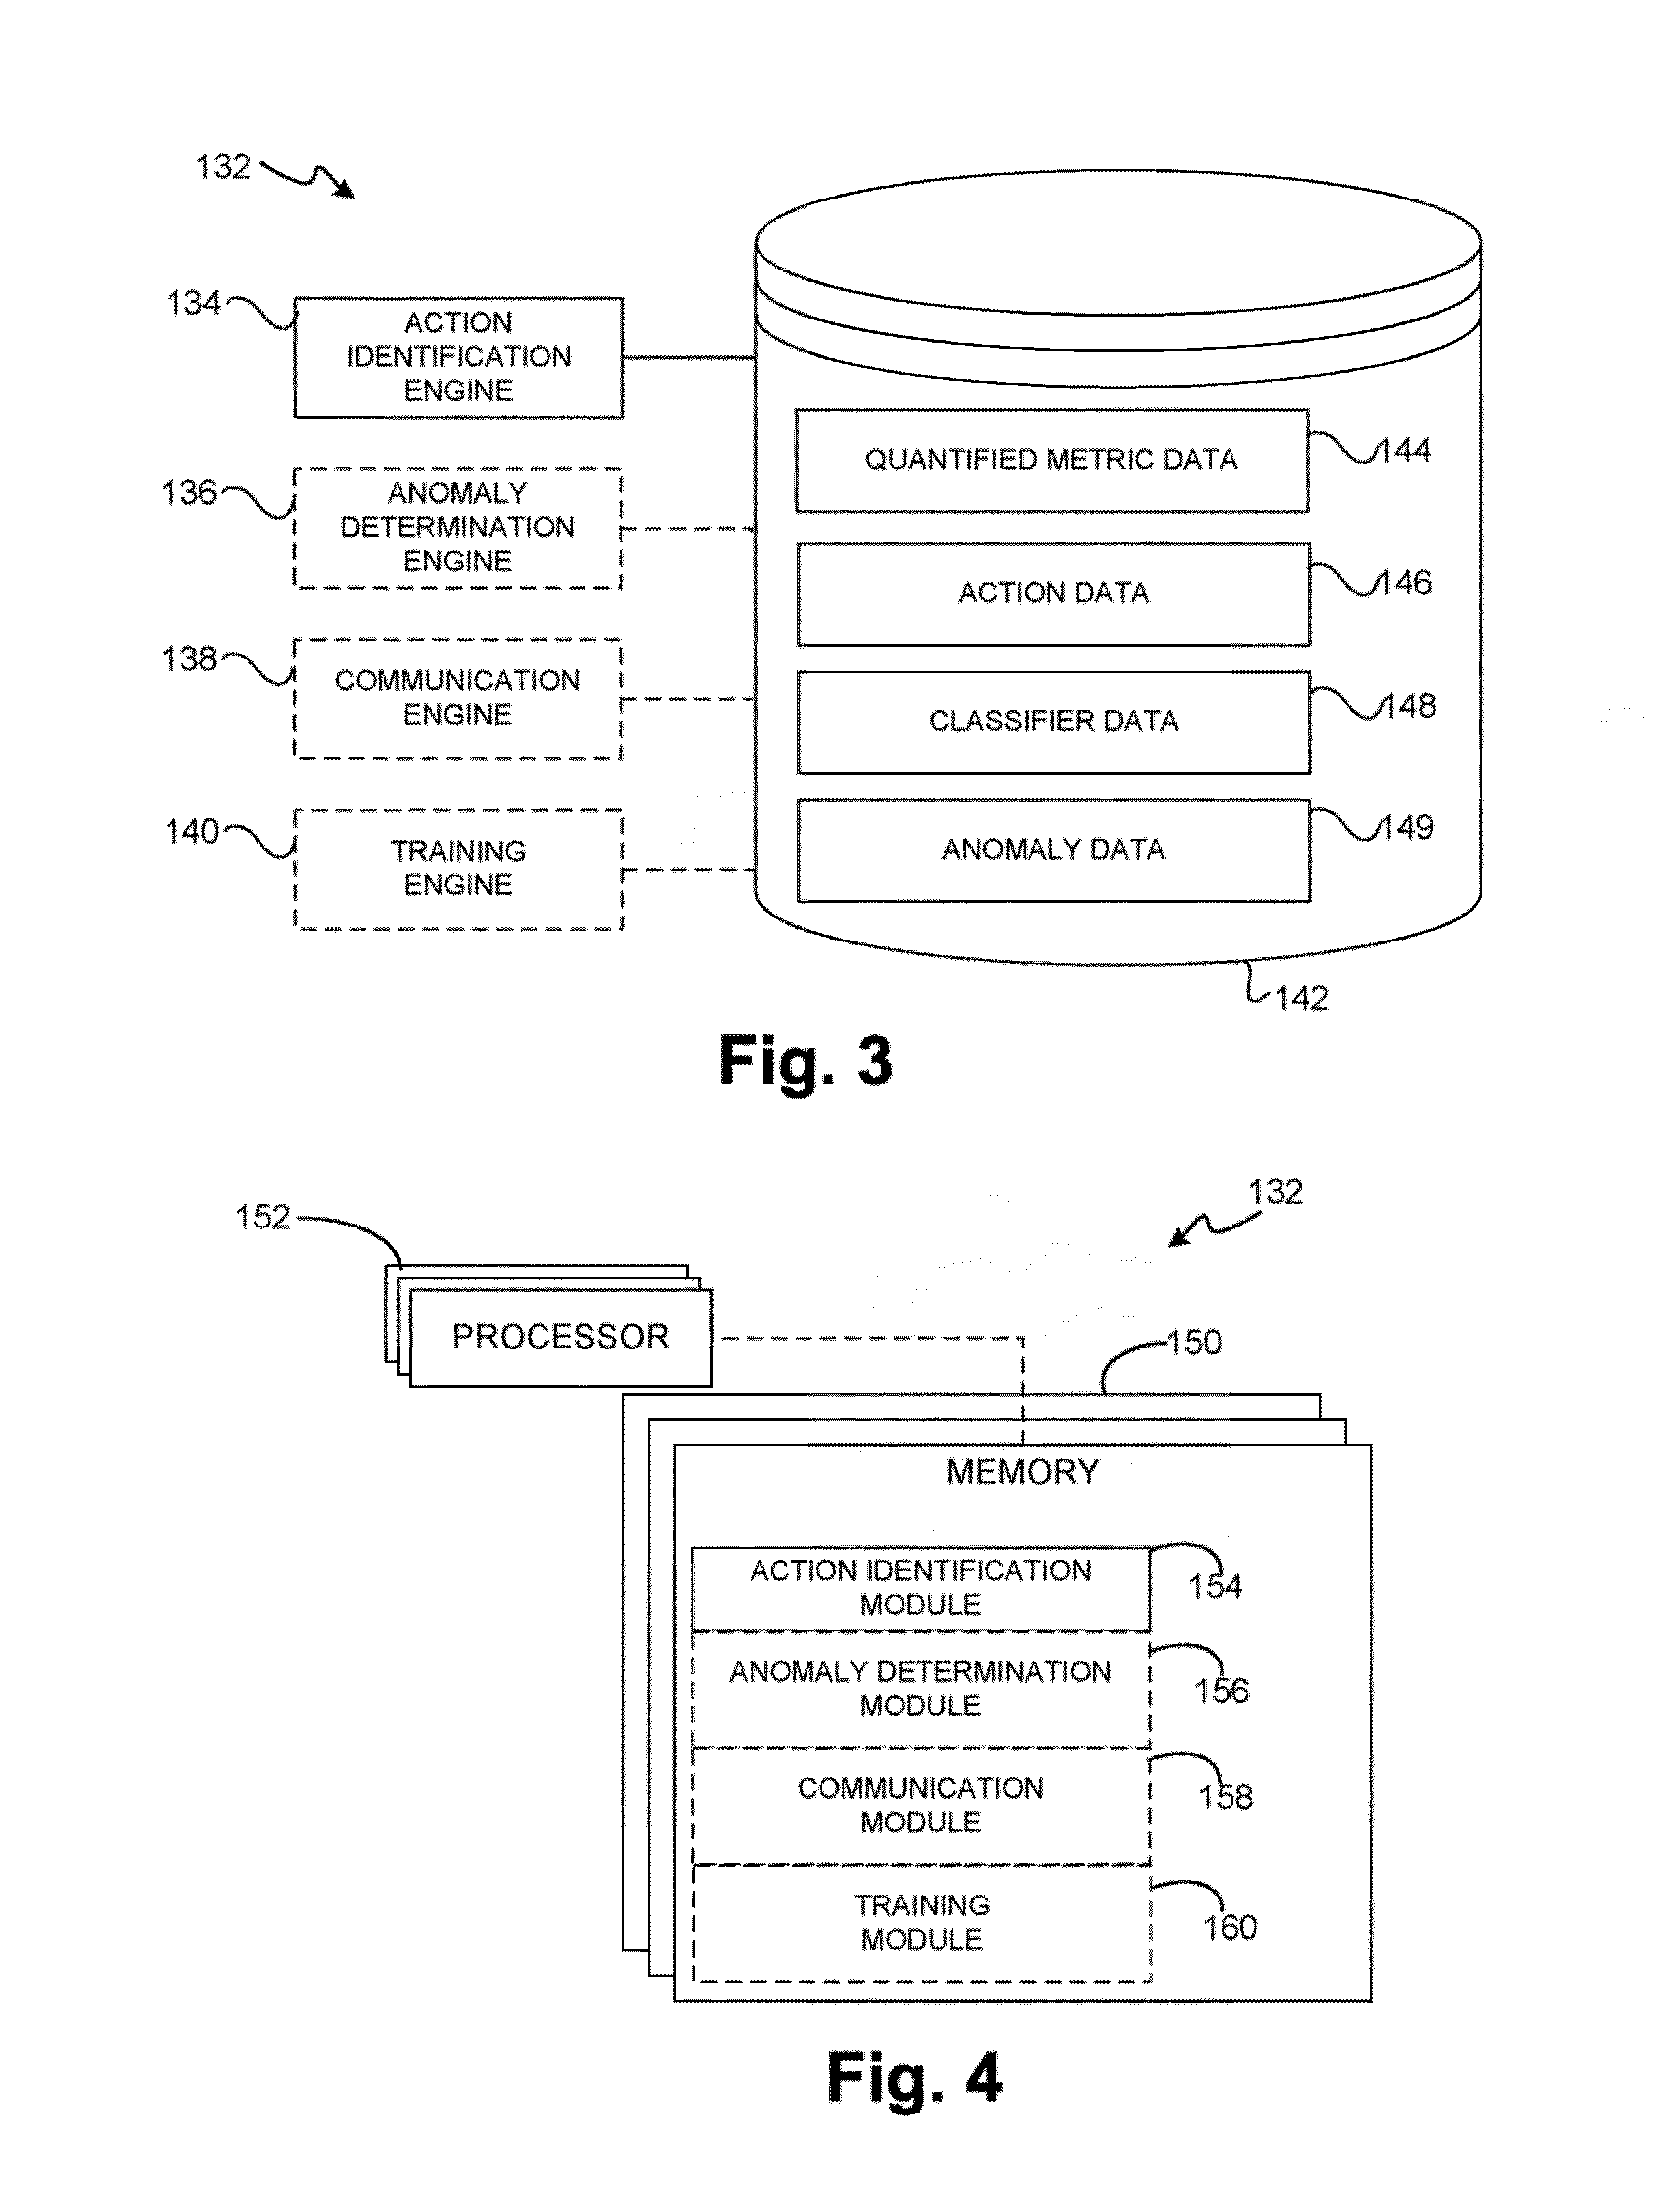 Methods and systems for identifying action for responding to anomaly in cloud computing system